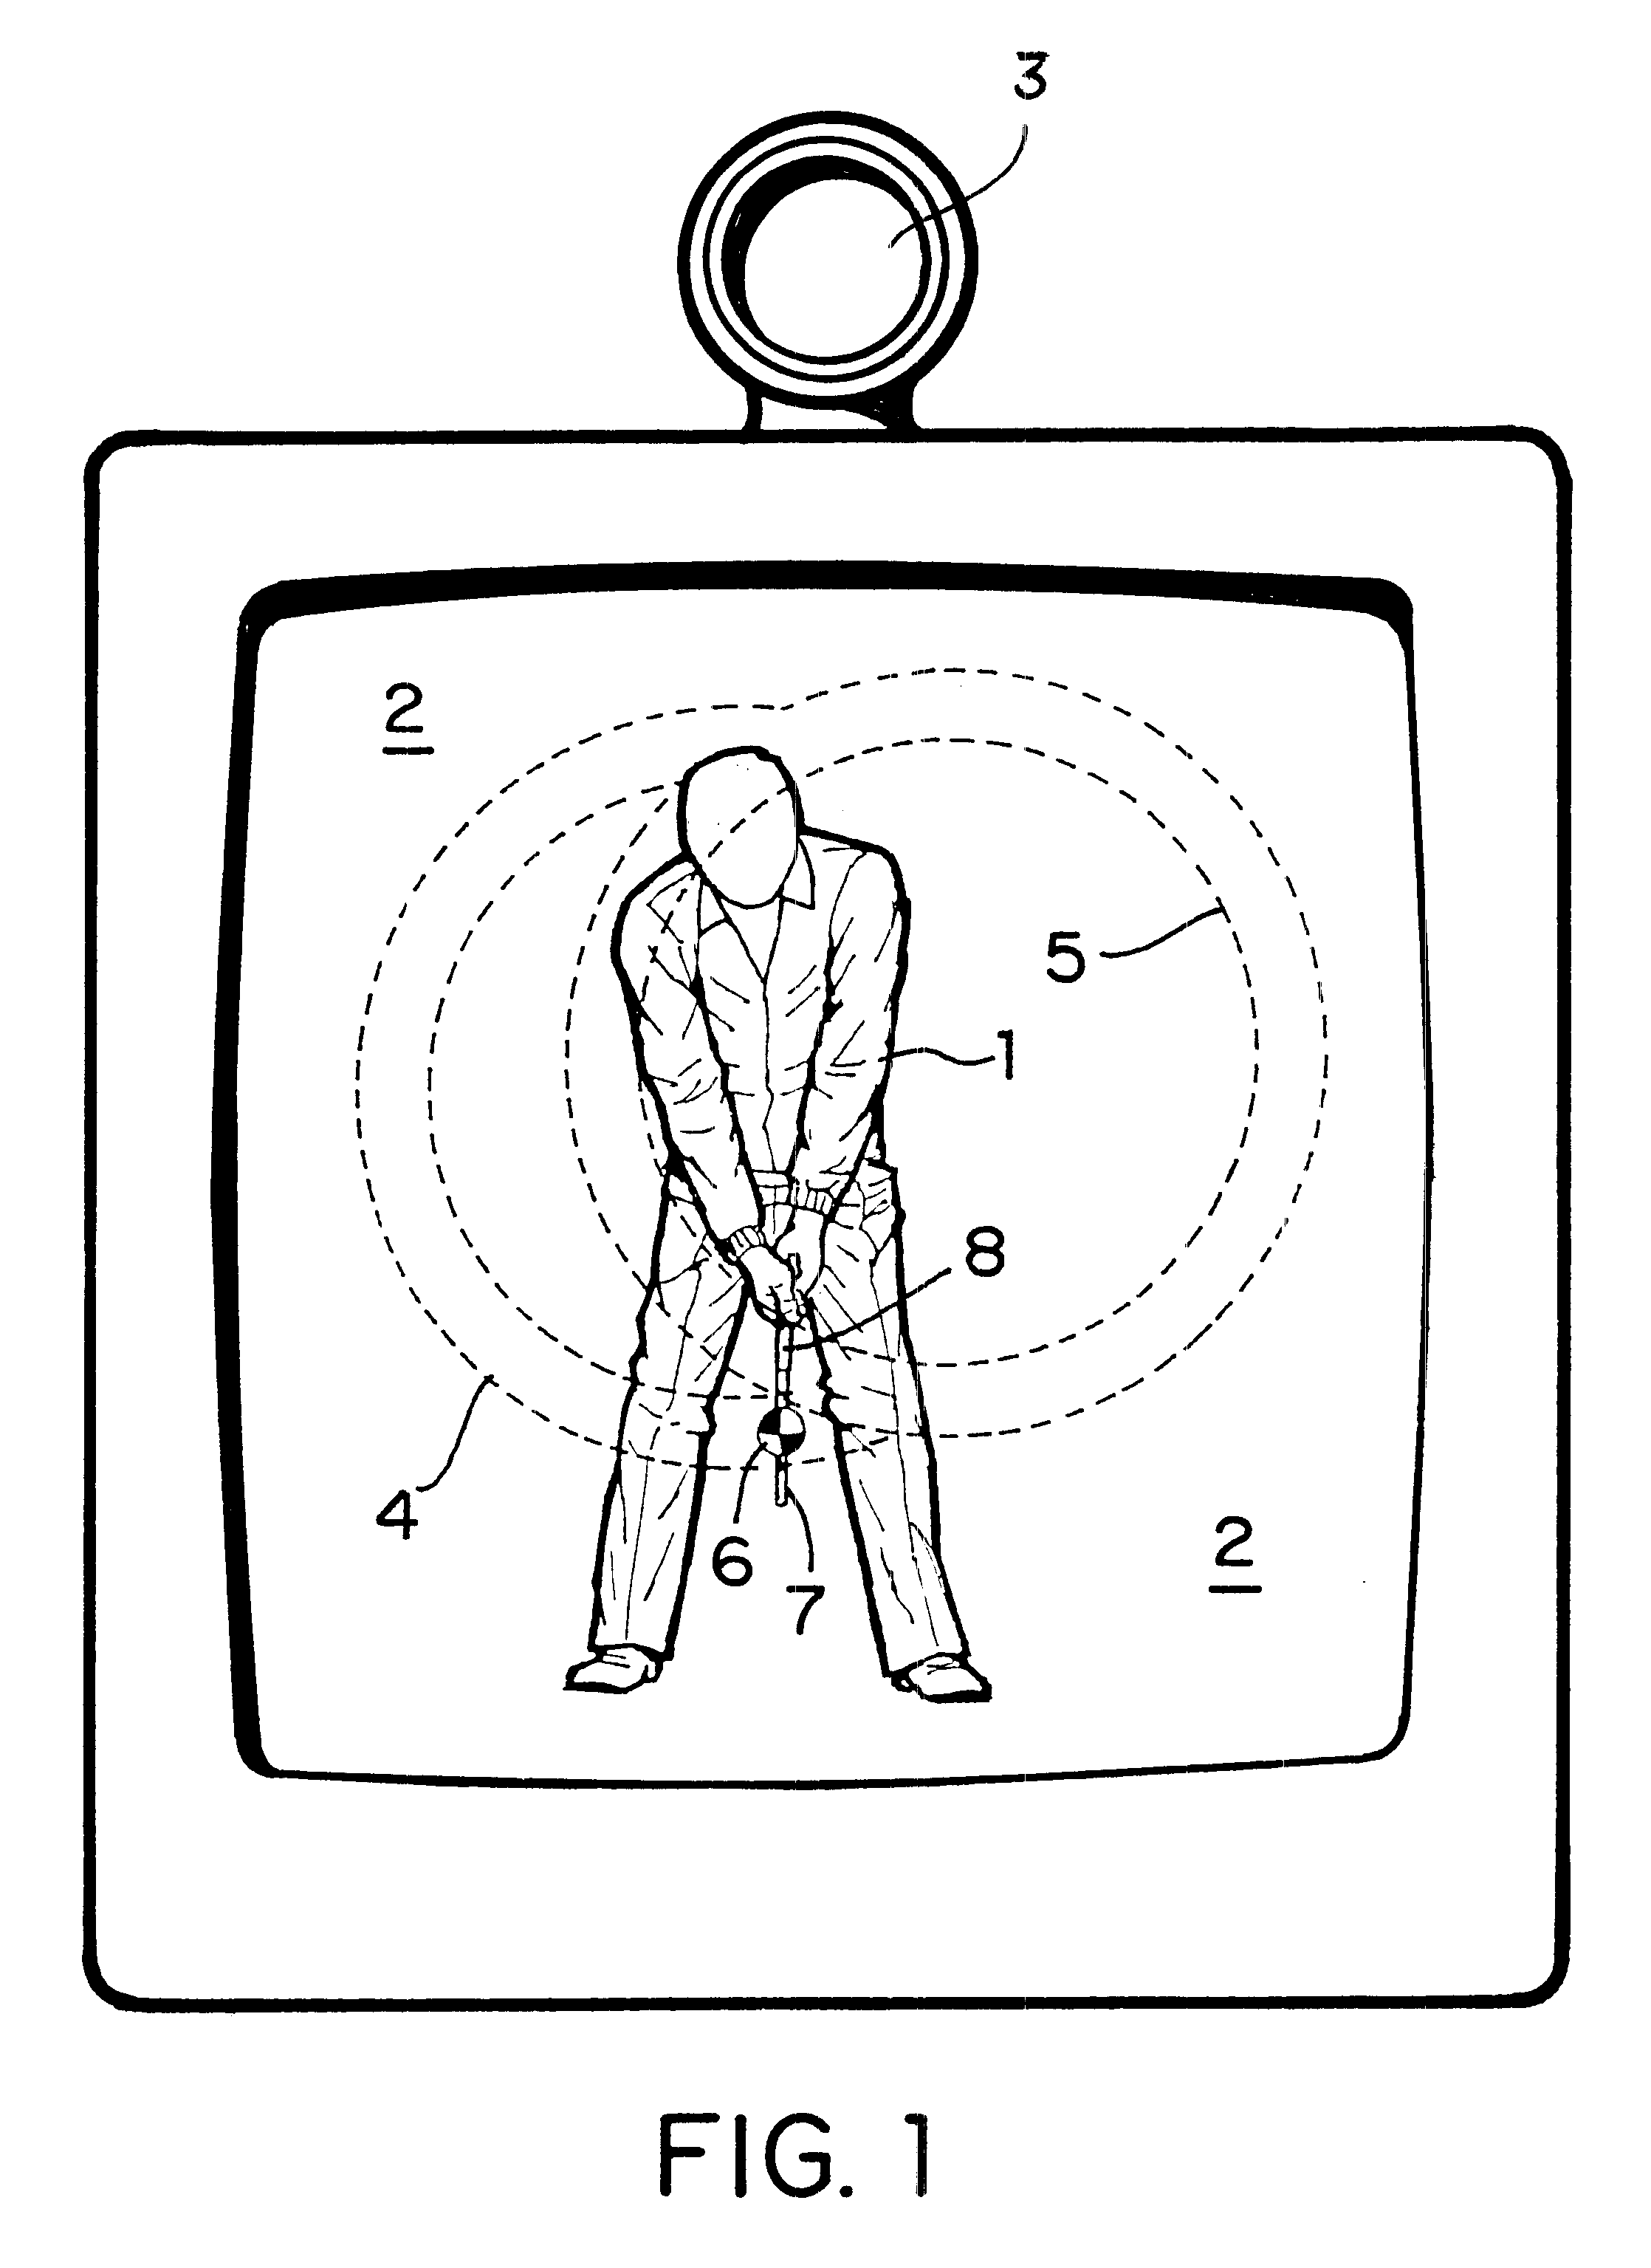 Interactive method and apparatus for tracking and analyzing a golf swing